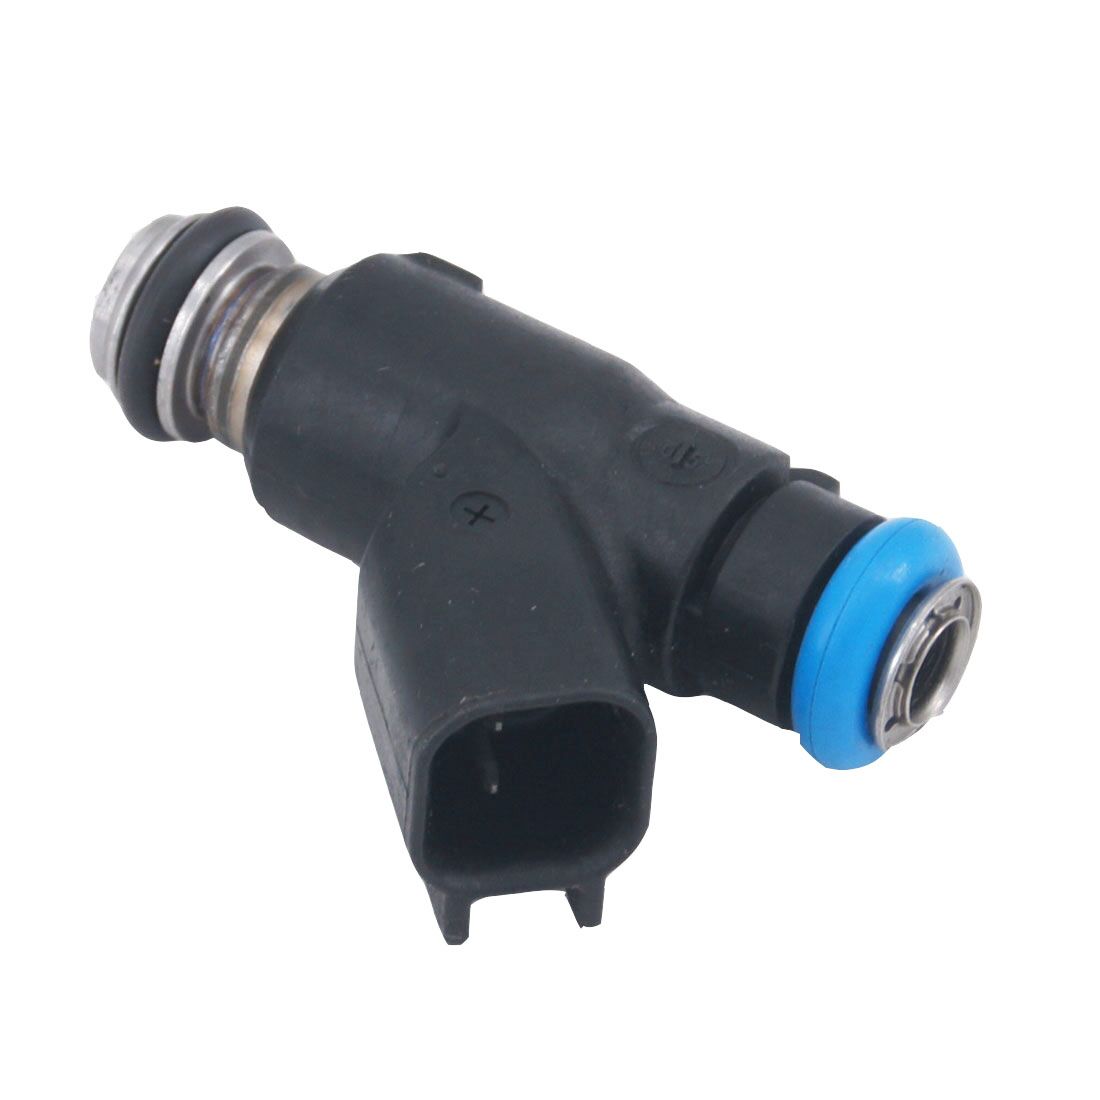 High performance good quality Oil Fuel Injector For GM Saturn Chevy 12616862 FJ10632-11B1 wholesale